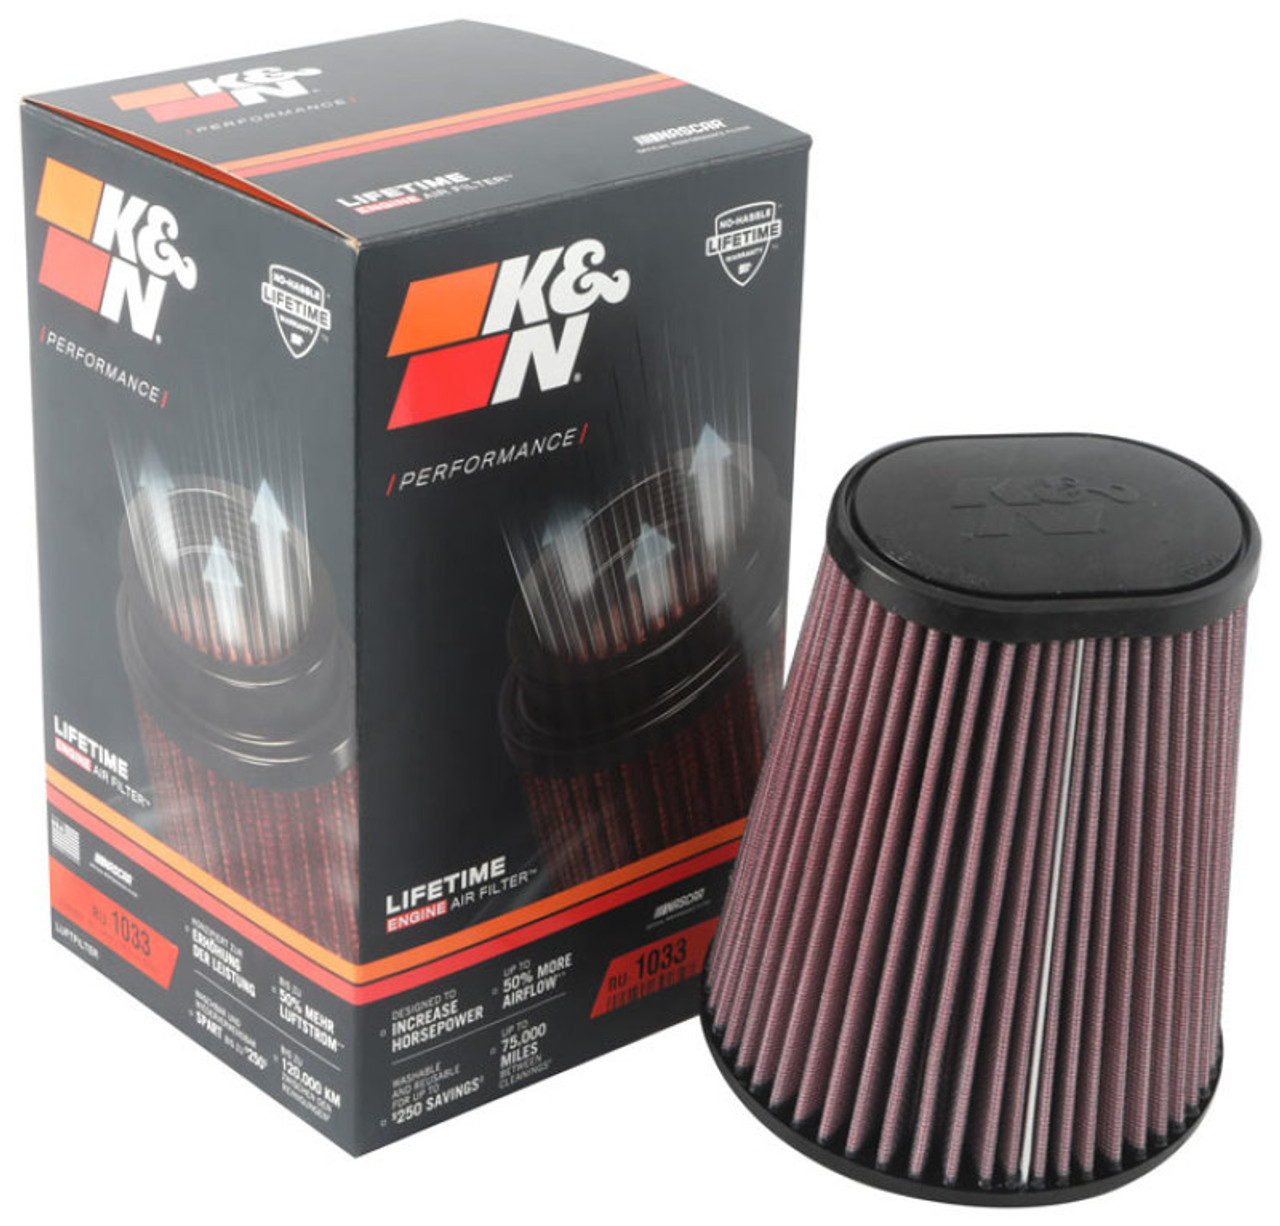 K&N Universal Clamp-On Air Filter 3-1/2in 10 Degree Flange 5-3/4in B 4-1/2in x 3-1/4in T 7in H - RU-1033 Photo - out of package